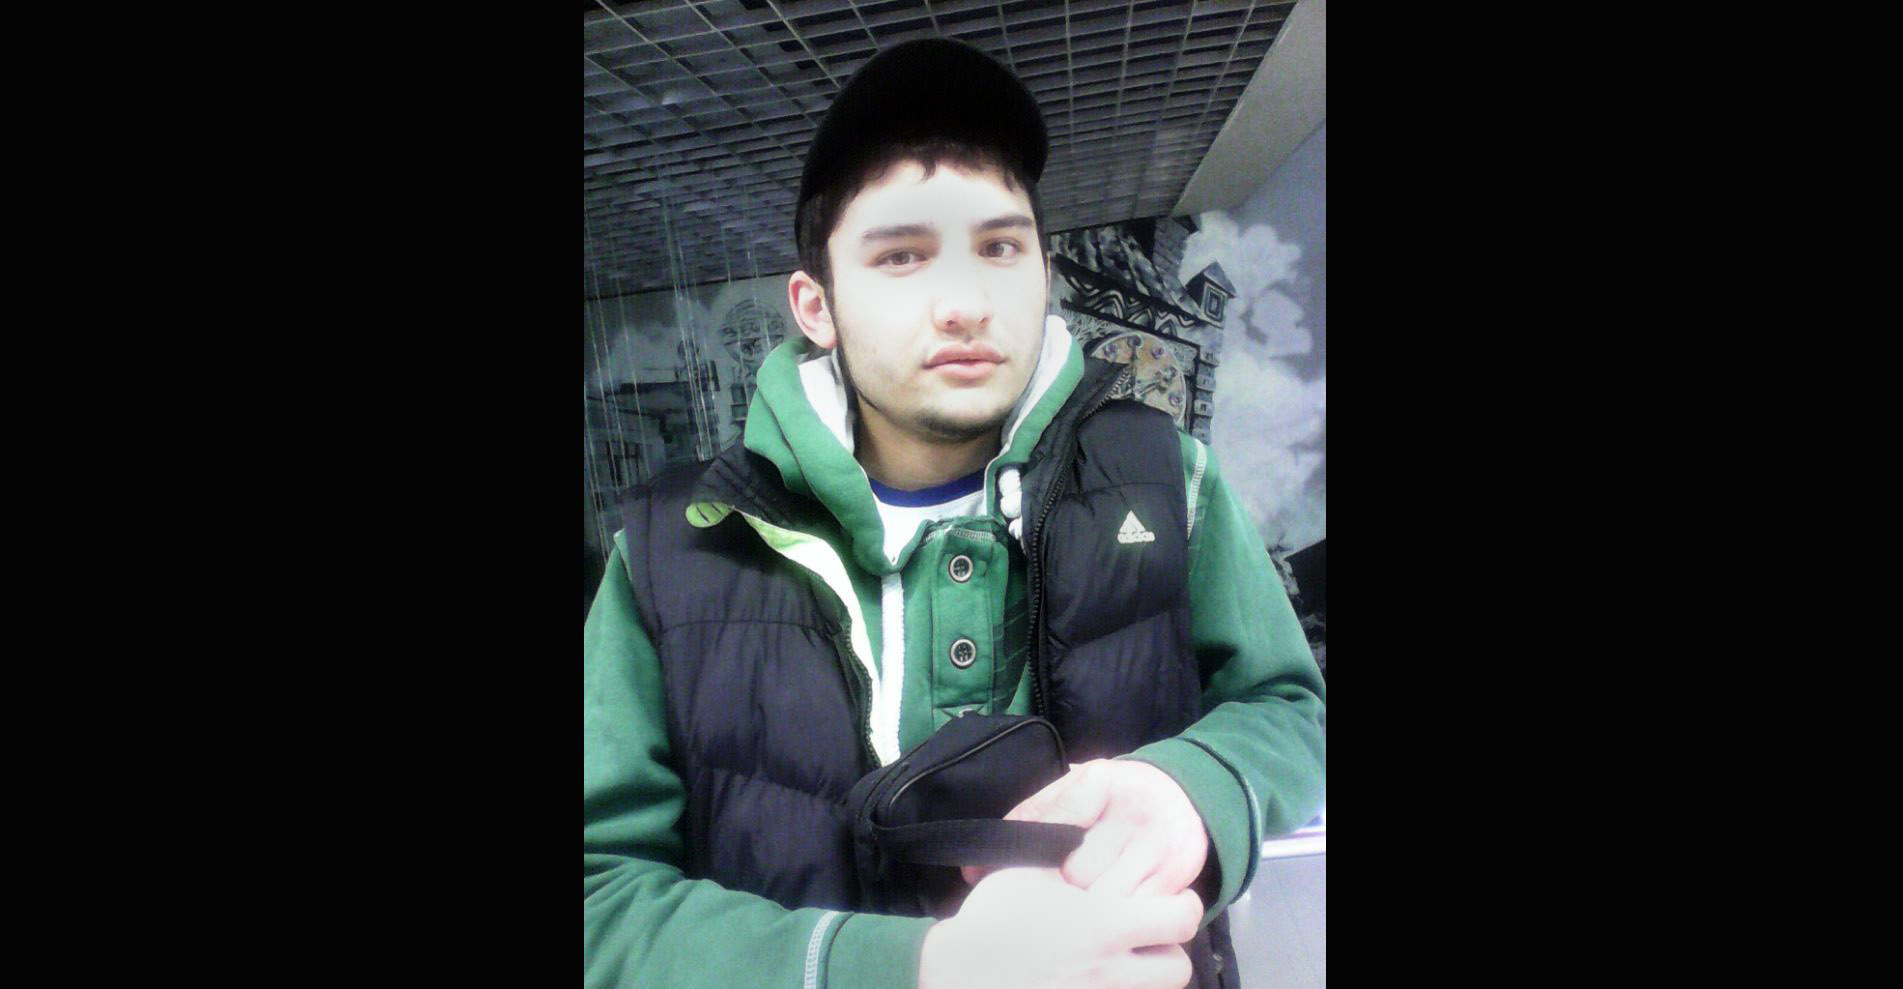 PHOTO: Akbarjon Djalilov, the suspect in the attack on the metro train in St. Petersburg, Russia, in an image posted to social media and shared by Russian state media. 